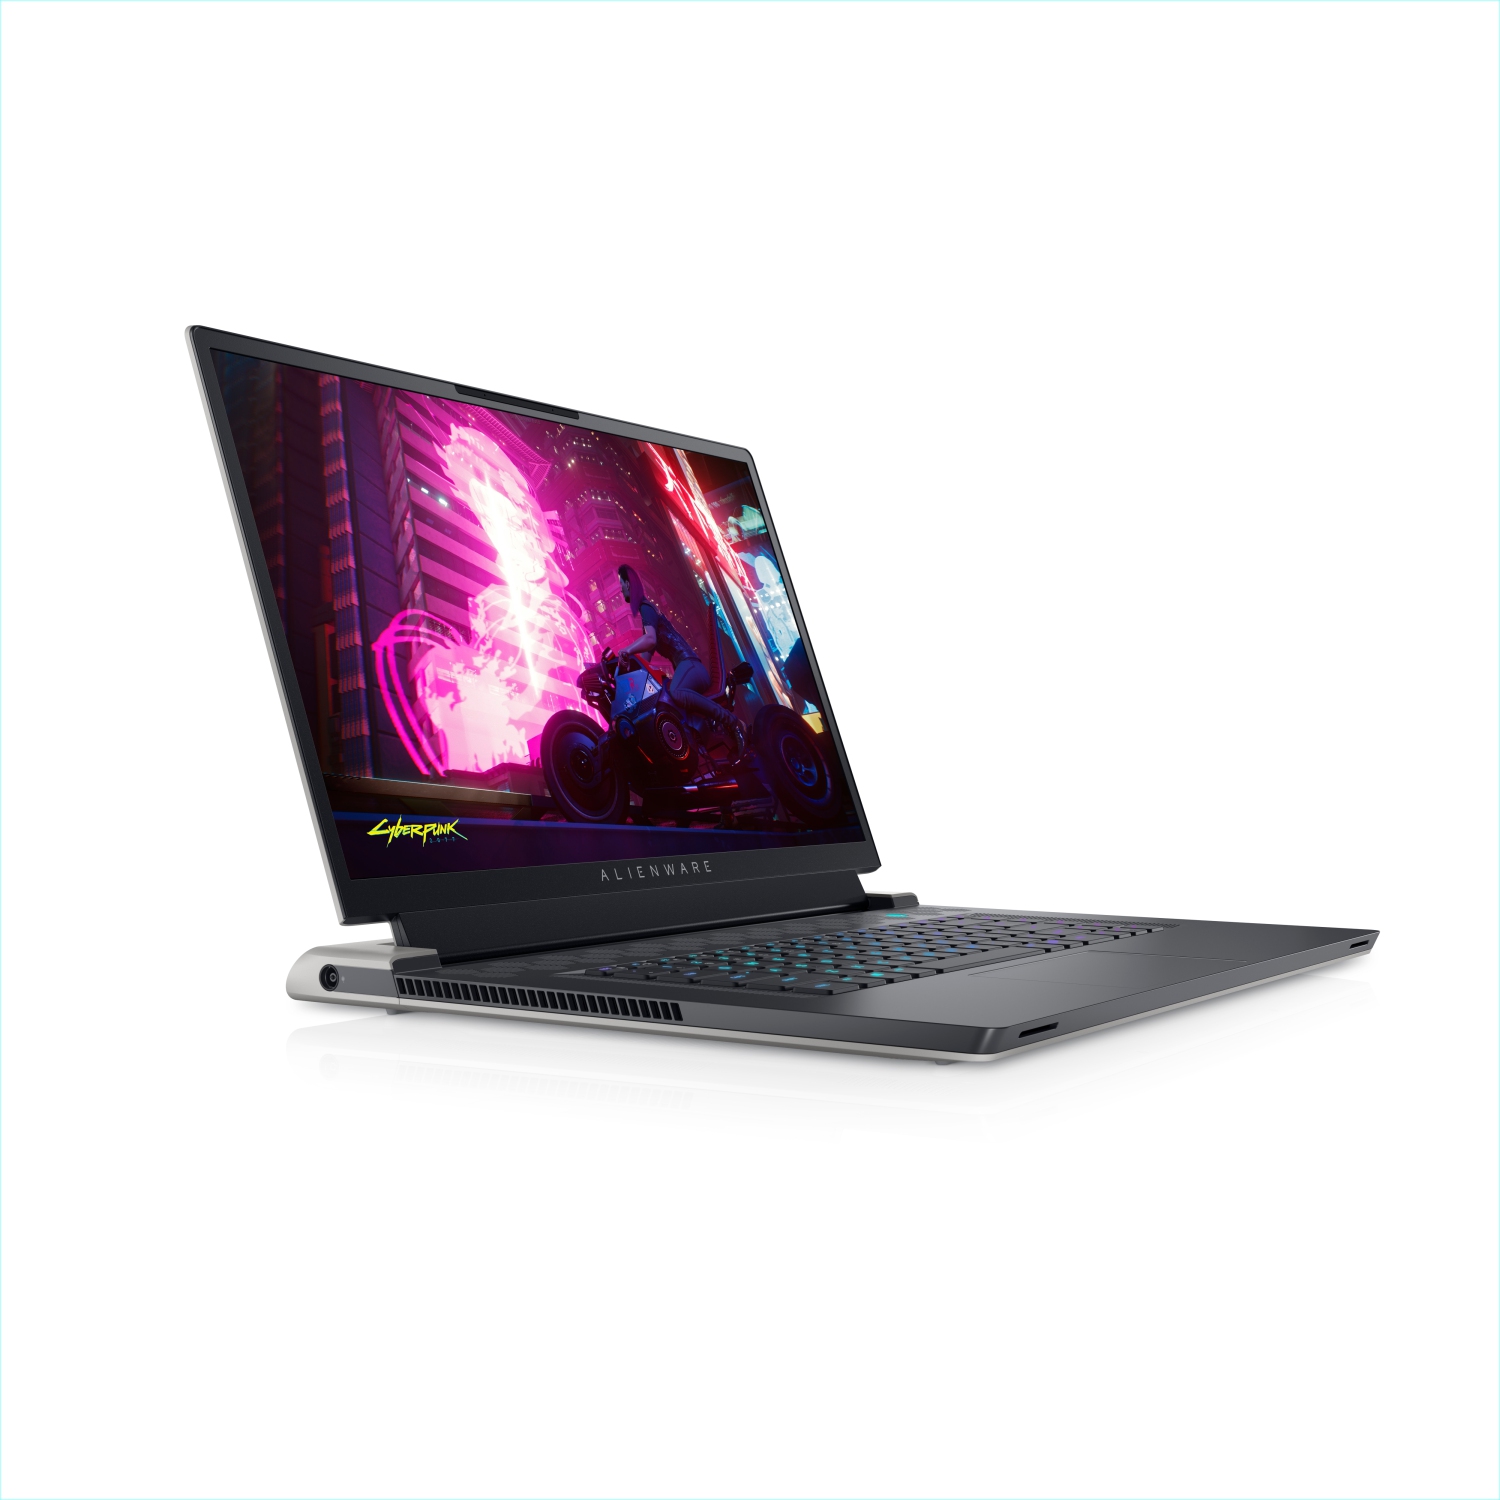 Refurbished (Excellent) - Dell Alienware X17 R1 Gaming Laptop (2021), 17.3" FHD, Core i7, 512GB SSD, 32GB RAM, RTX 3070, 8 Cores @ 4.6 GHz, 11th Gen CPU Certified